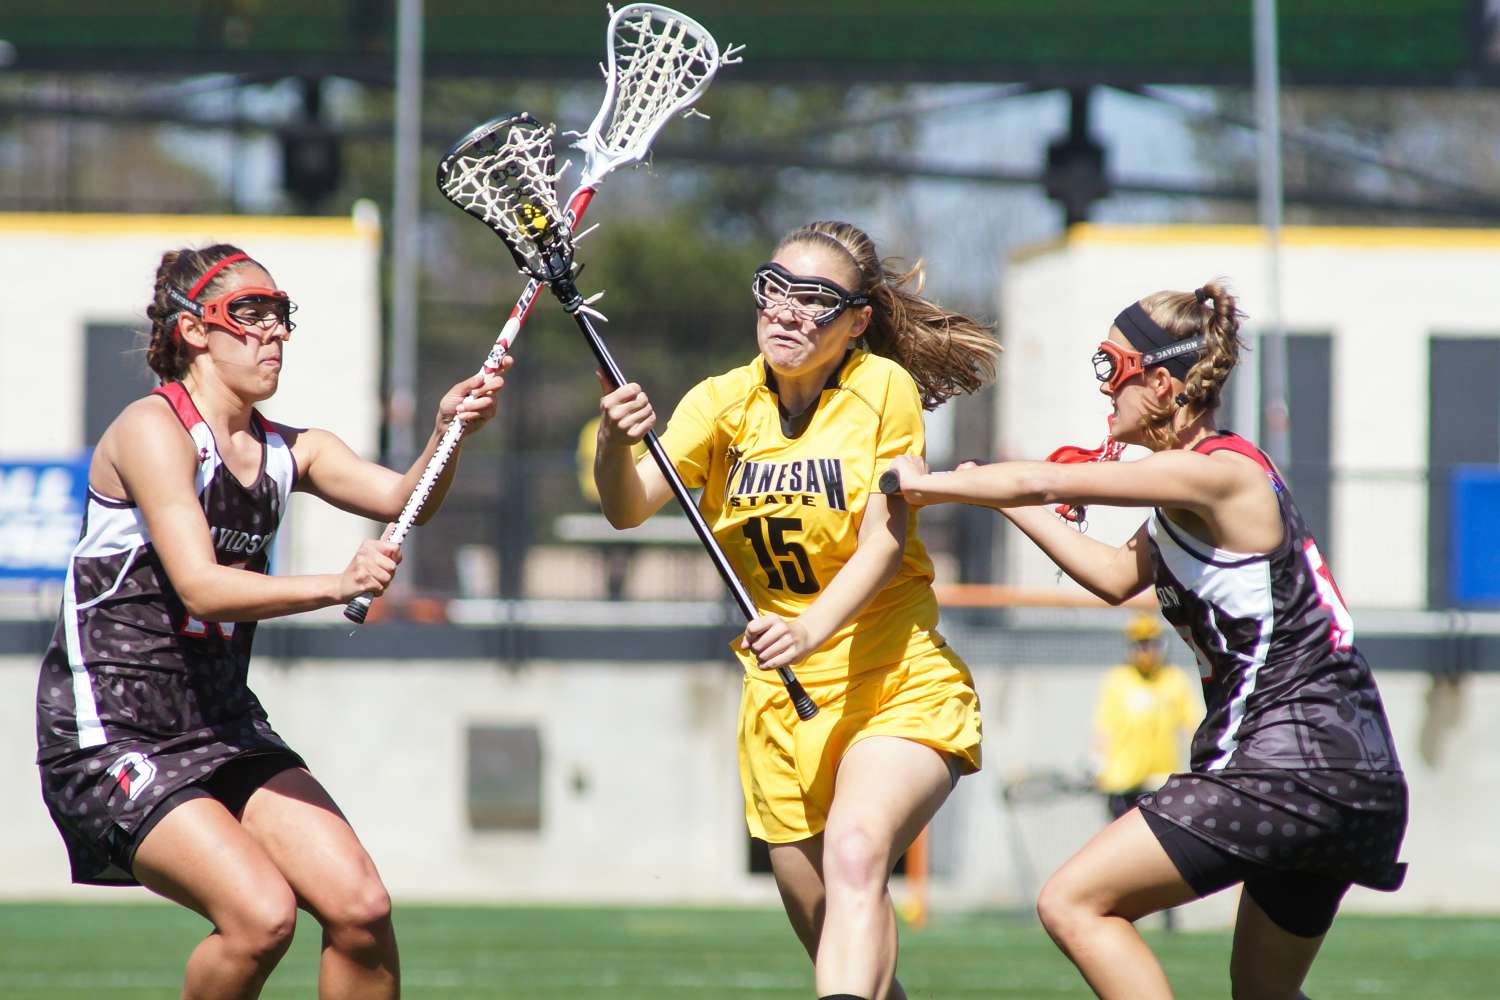 Individual accolades flow for young lacrosse team